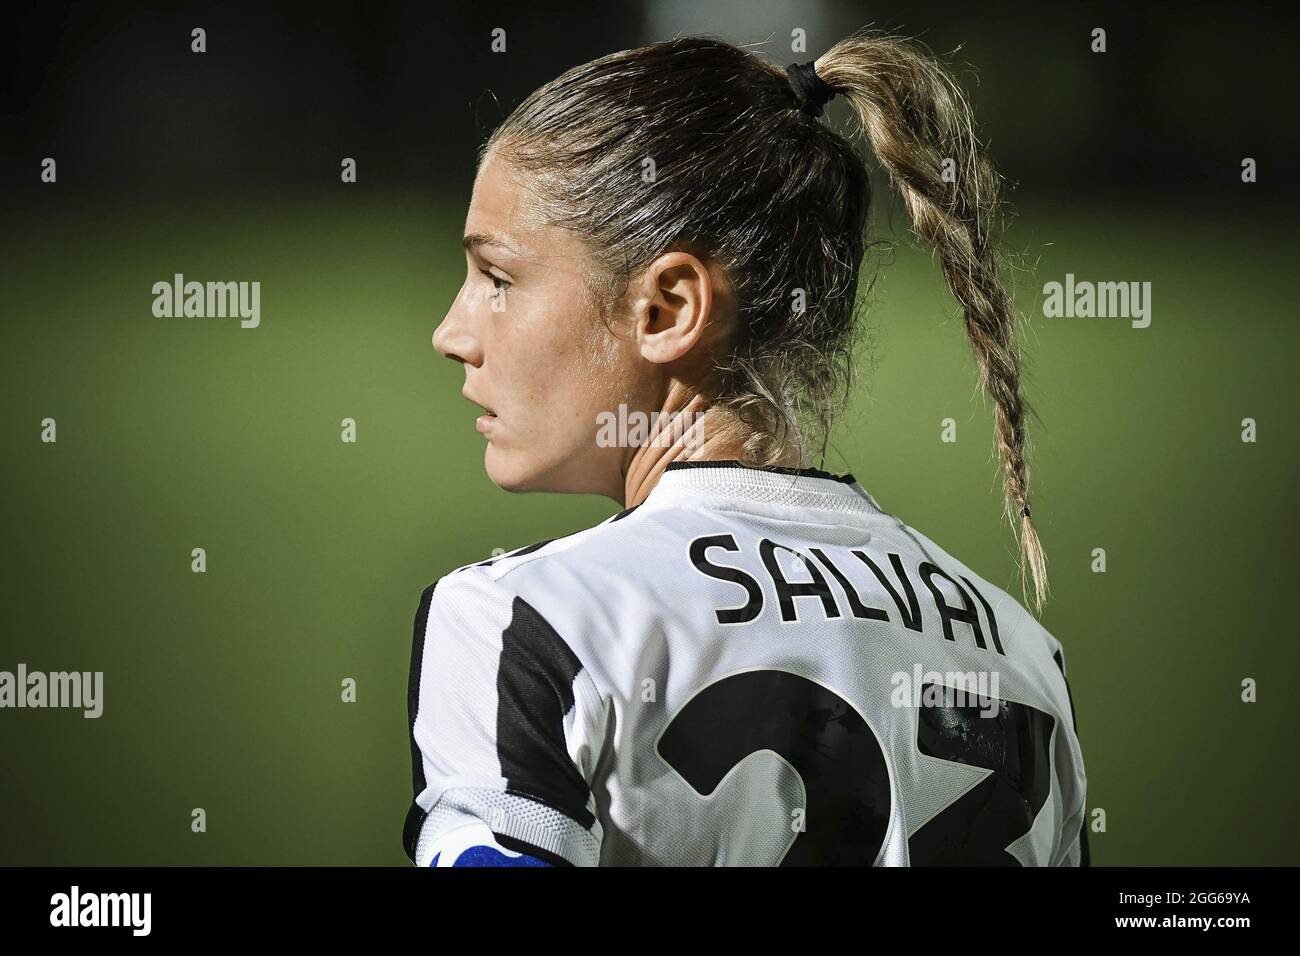 Turin, Italy. 28th Aug, 2021. Cecilia Salvai (#23 Juventus Women) during  the first match of the Campionato Nazionale Femminile Serie A 2021 2022  Credit: SPP Sport Press Photo. /Alamy Live News Stock Photo - Alamy